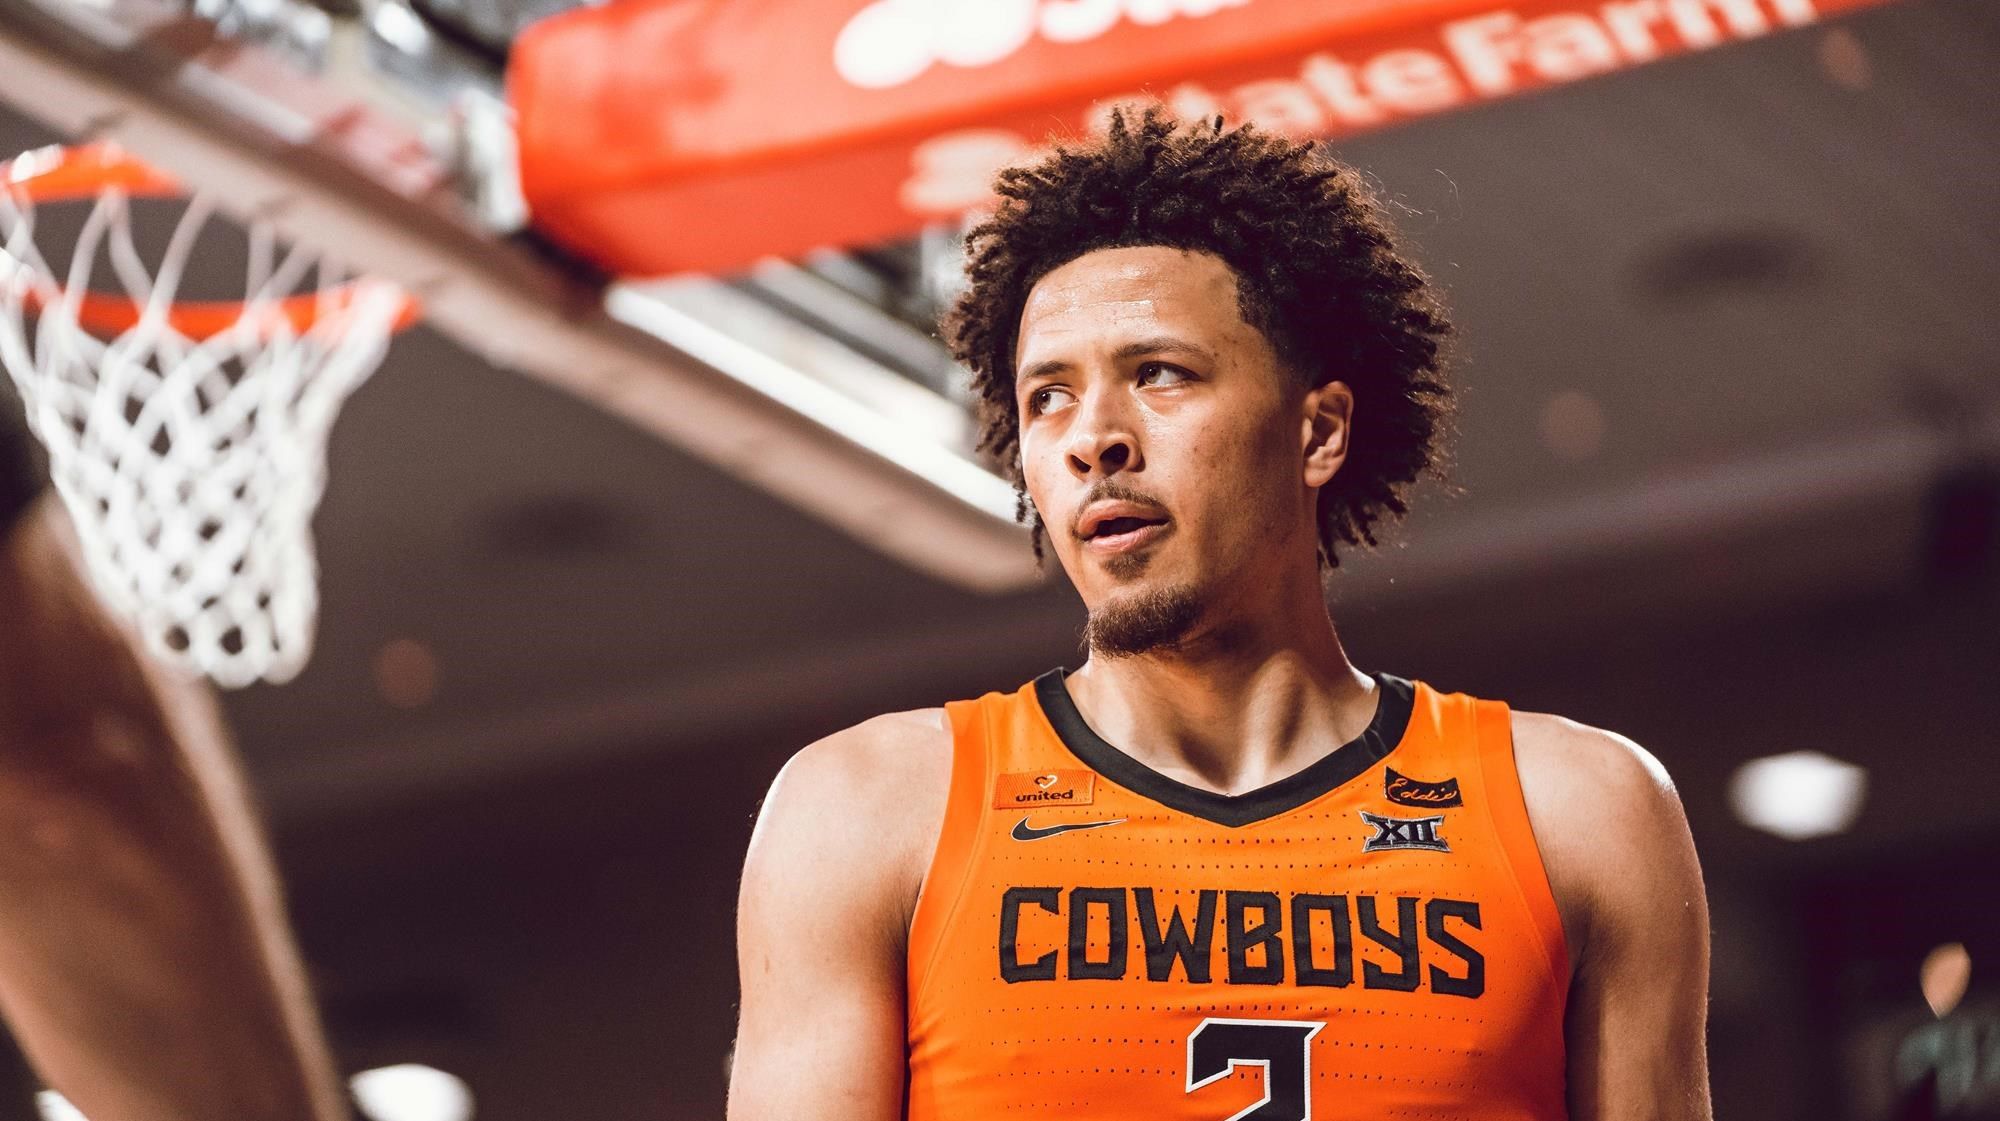 2021 NBA Draft: Detroit Pistons Wins Lottery, Could Nab 6-foot-8 Point Guard Cade Cunningham